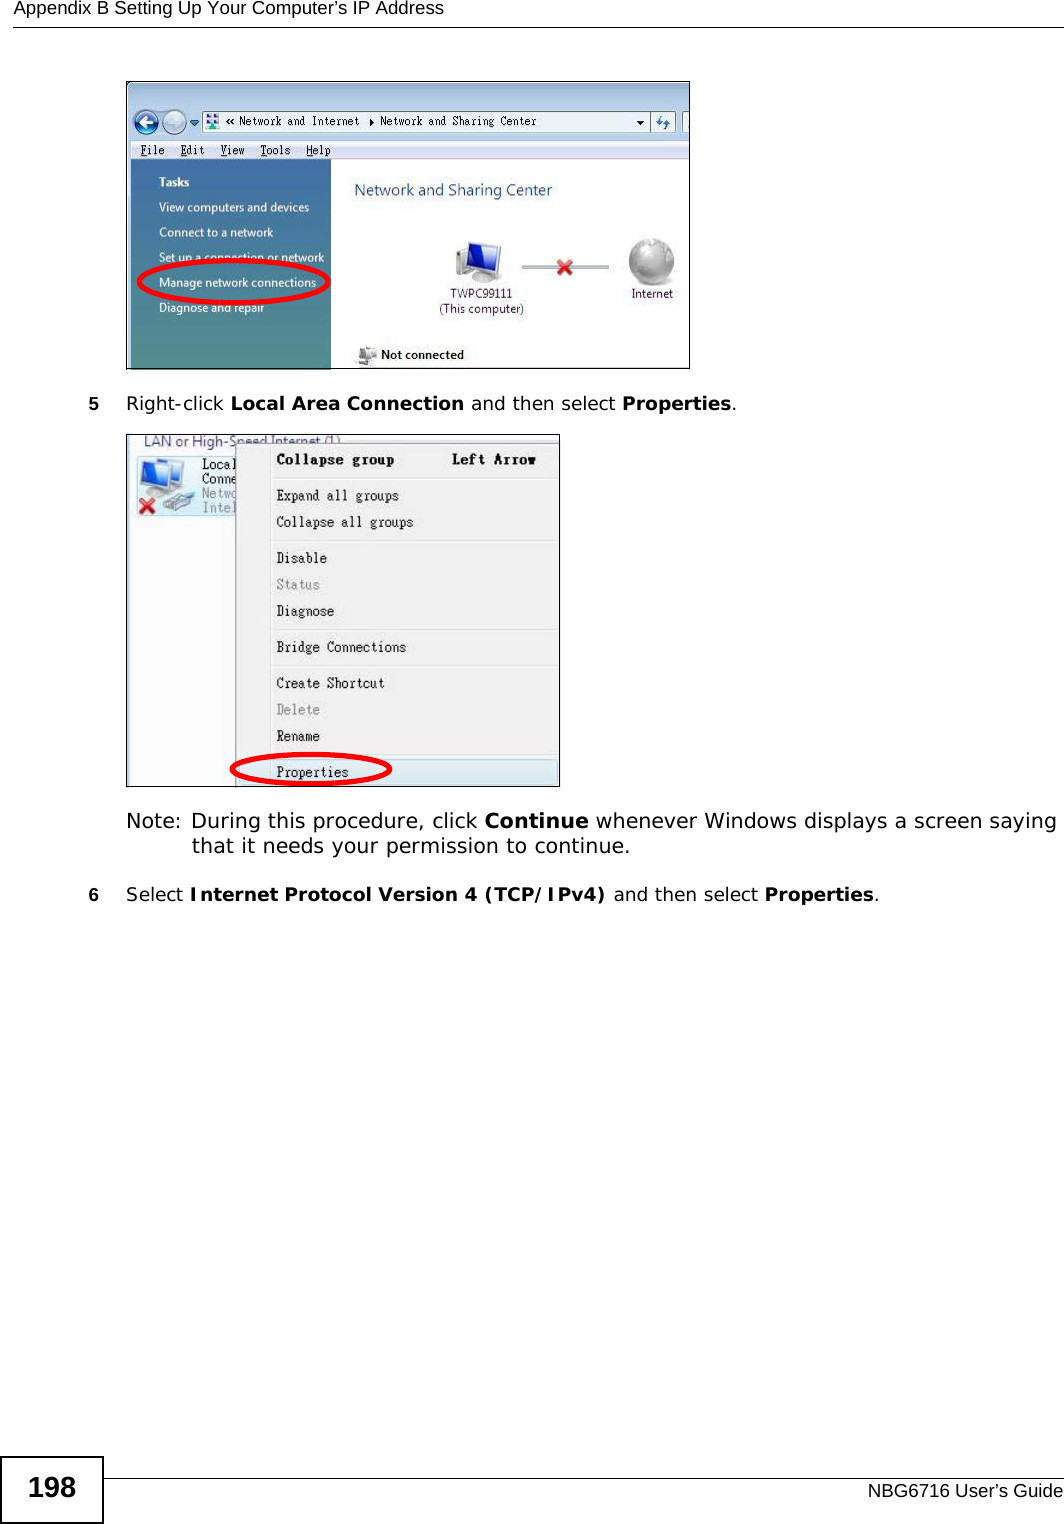 Appendix B Setting Up Your Computer’s IP AddressNBG6716 User’s Guide1985Right-click Local Area Connection and then select Properties.Note: During this procedure, click Continue whenever Windows displays a screen saying that it needs your permission to continue.6Select Internet Protocol Version 4 (TCP/IPv4) and then select Properties.